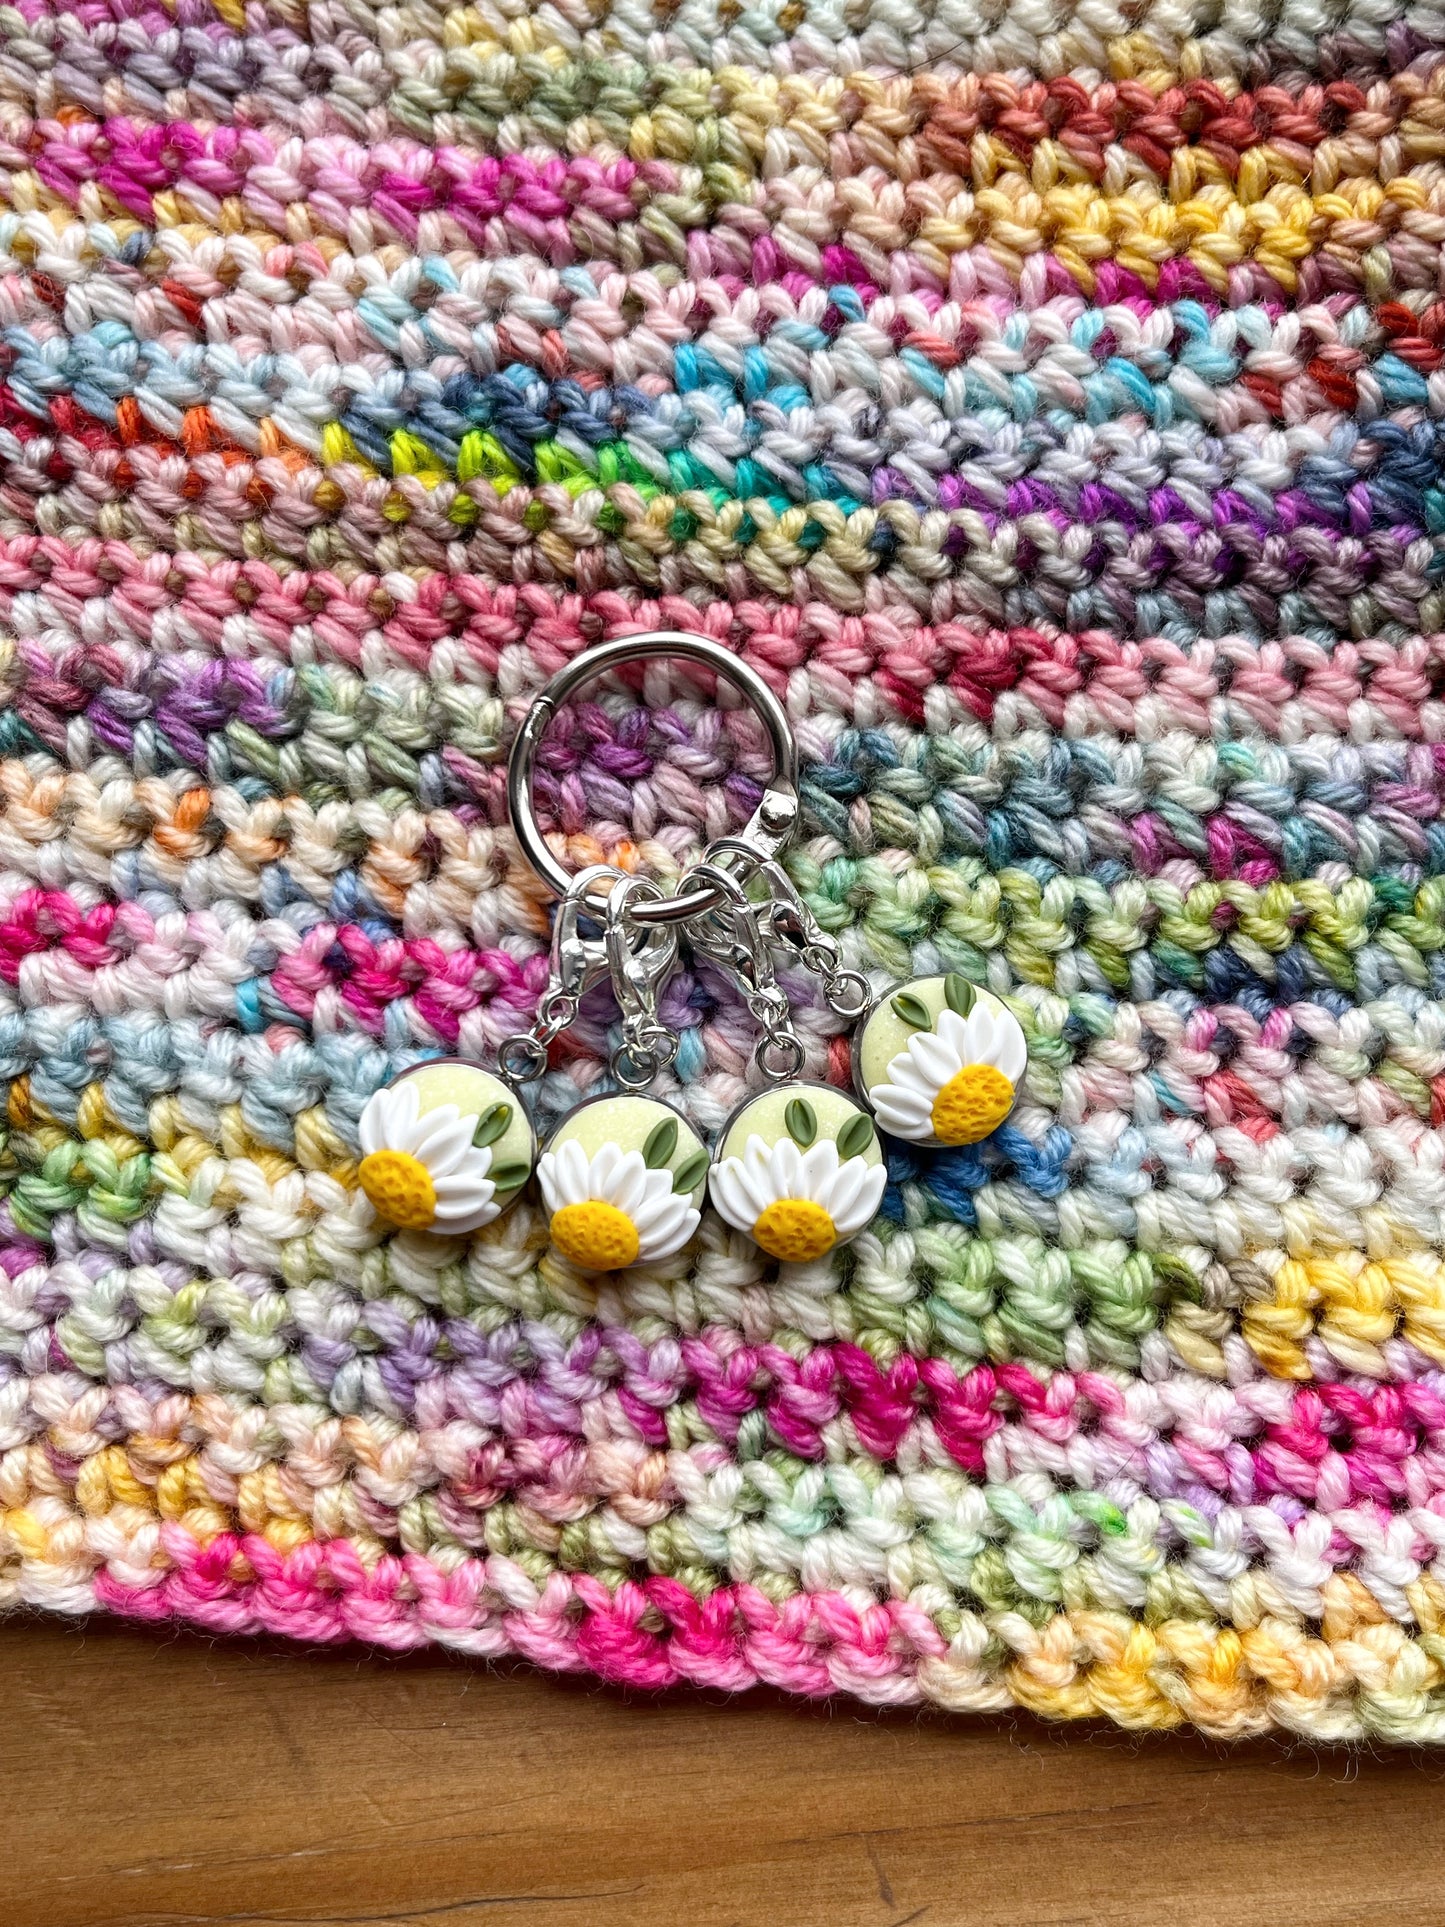 Daisy Stitch Markers, Polymer Clay Flower Progress Keepers, Crochet Markers